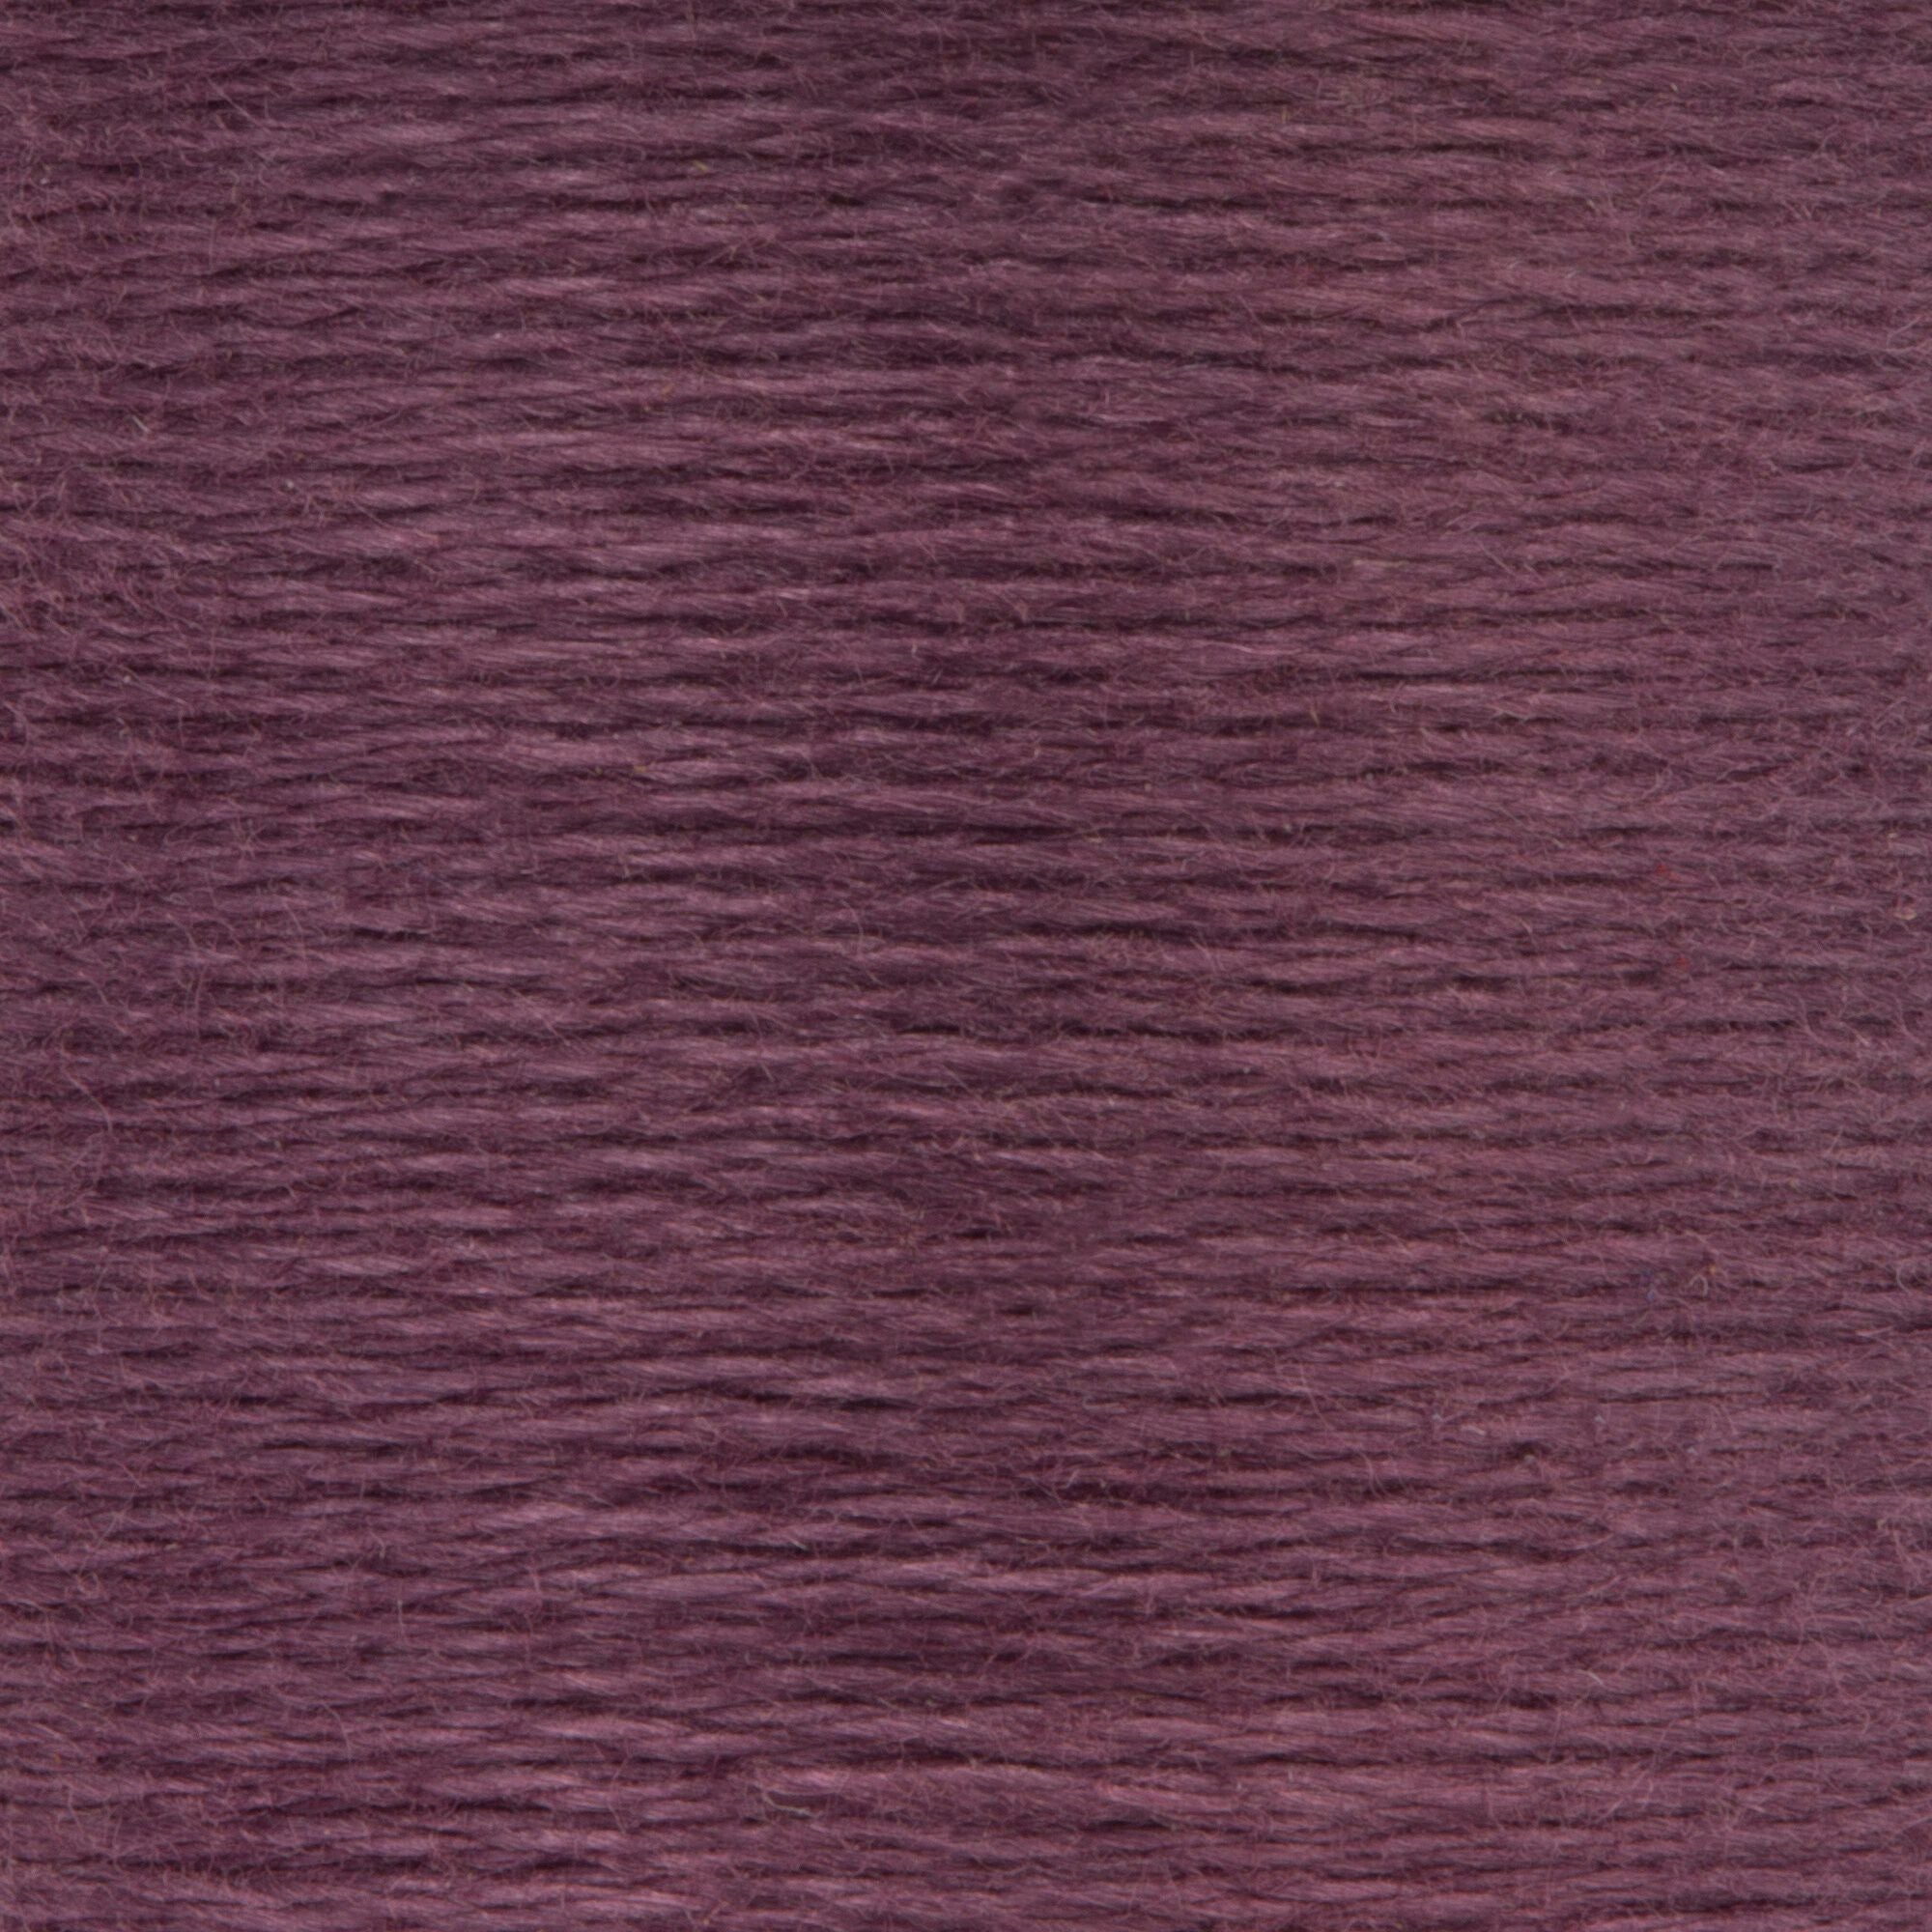 Anchor Embroidery Floss in Amethyst Dk